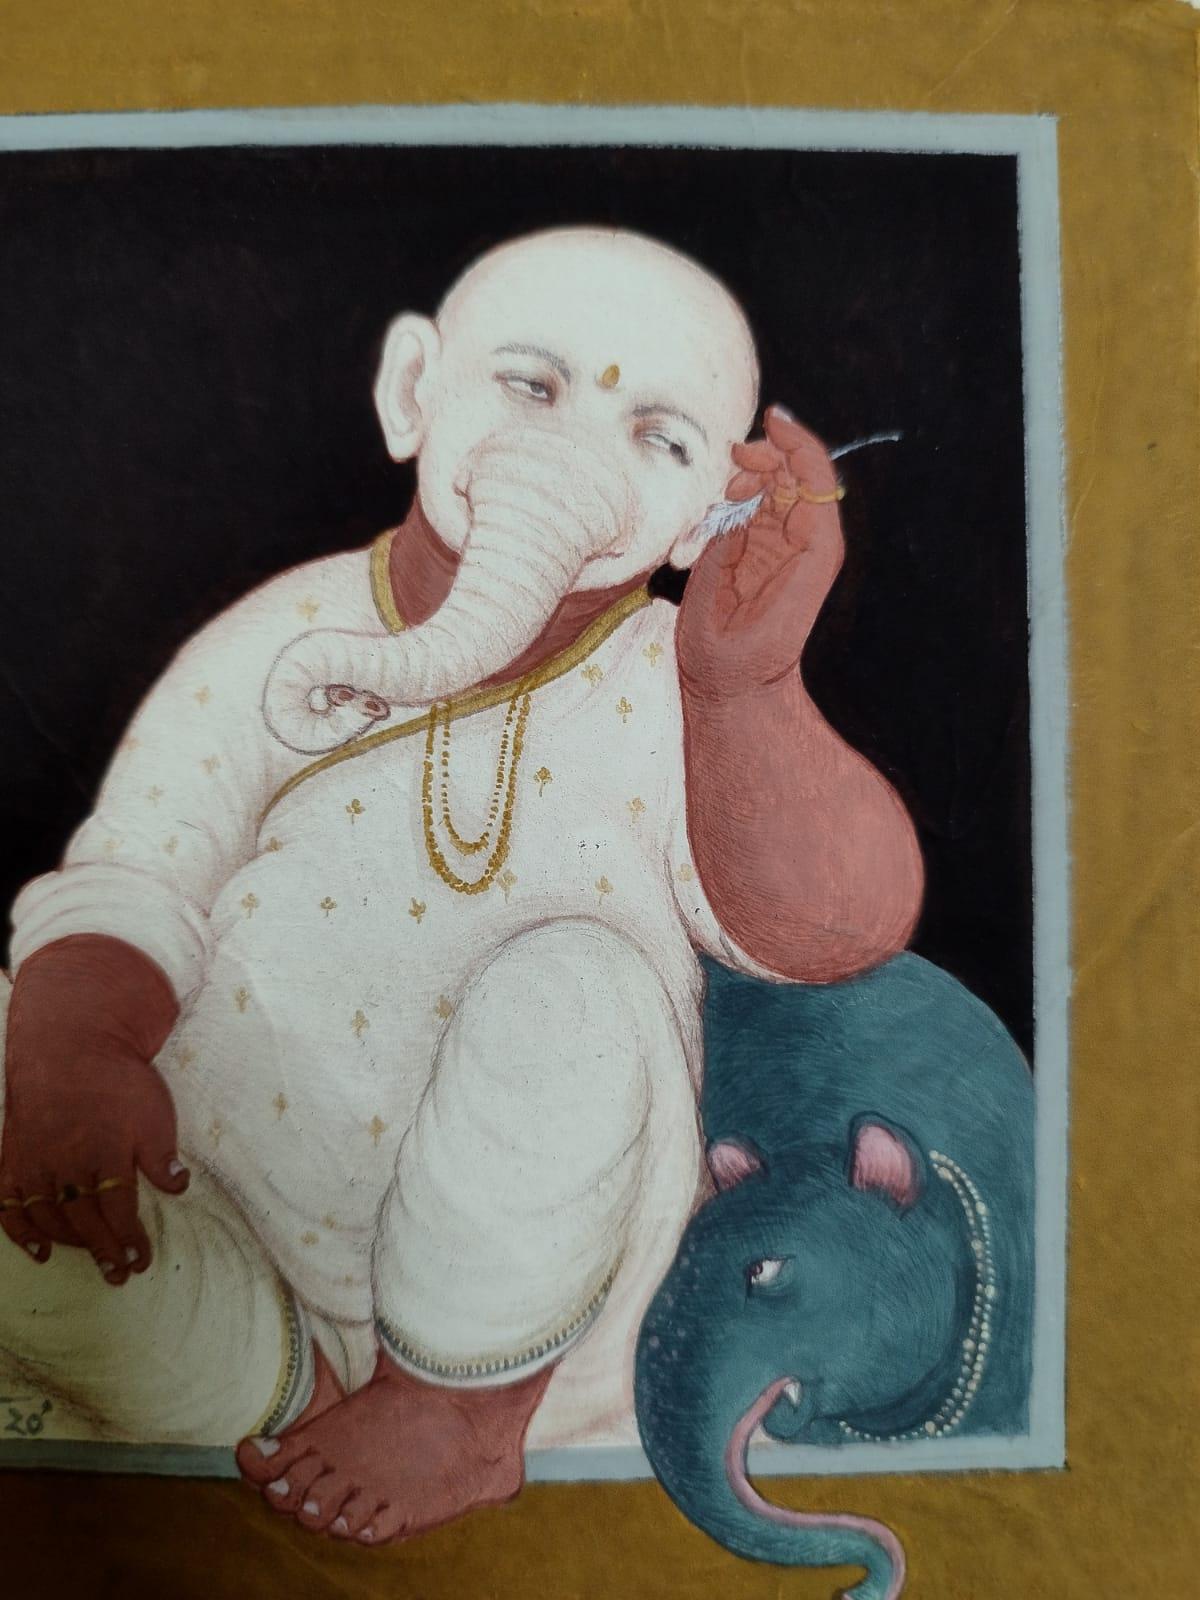 Ganesha in Deferent Mode #3 - Painting by Partha Mondal